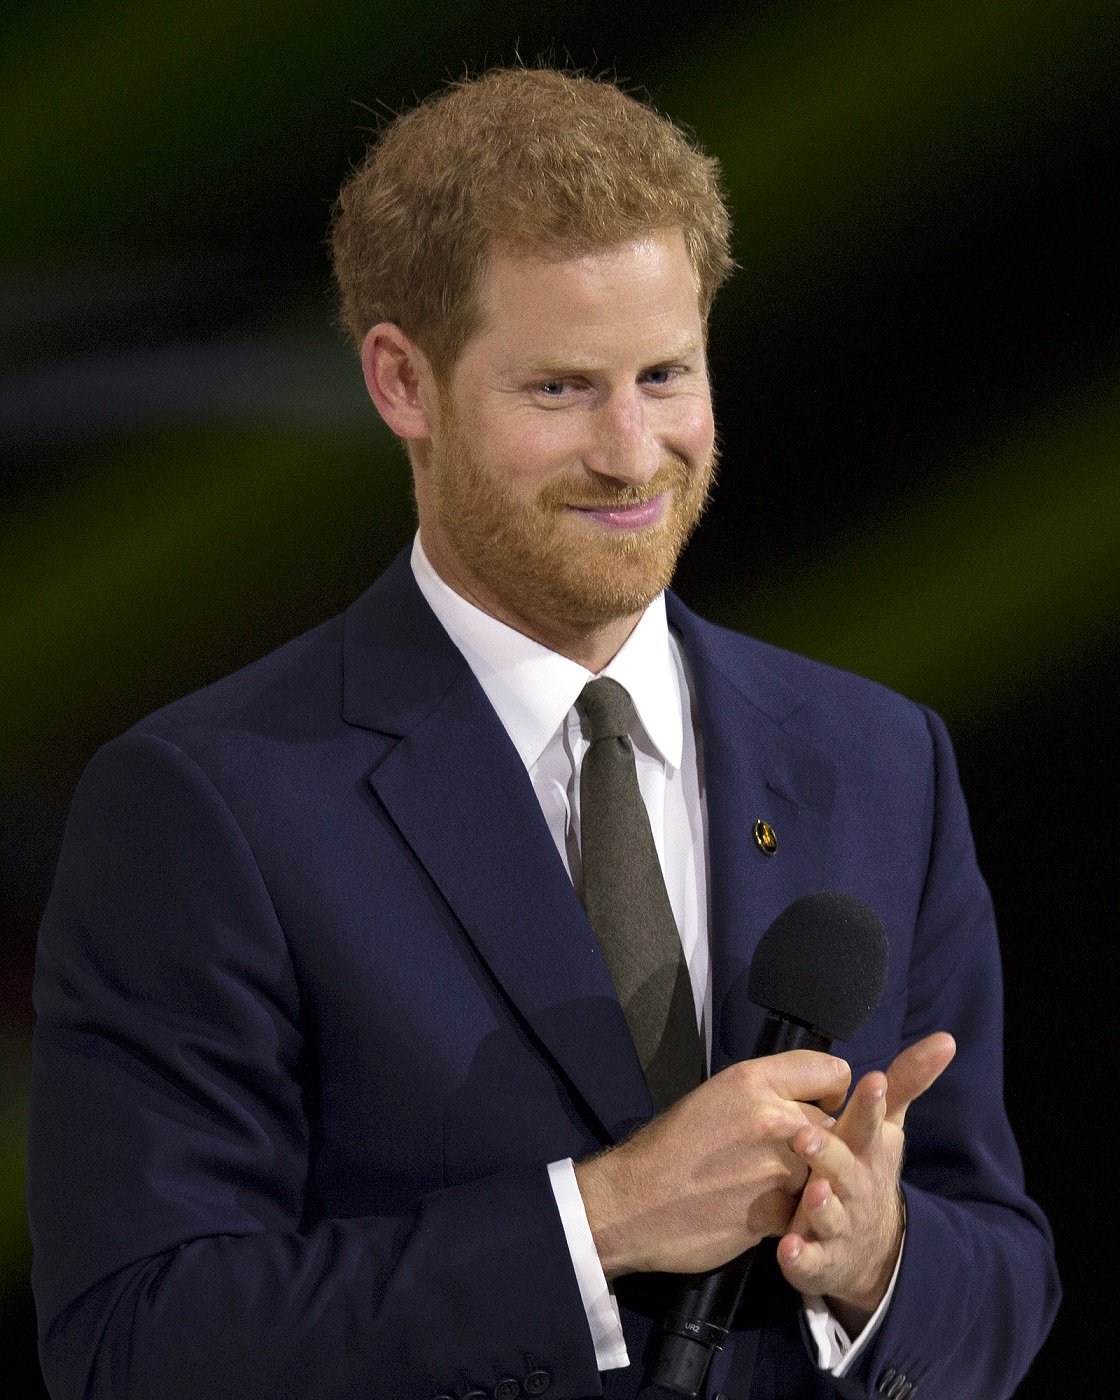     Happy Birthday to Prince Harry, Duke of Sussex      